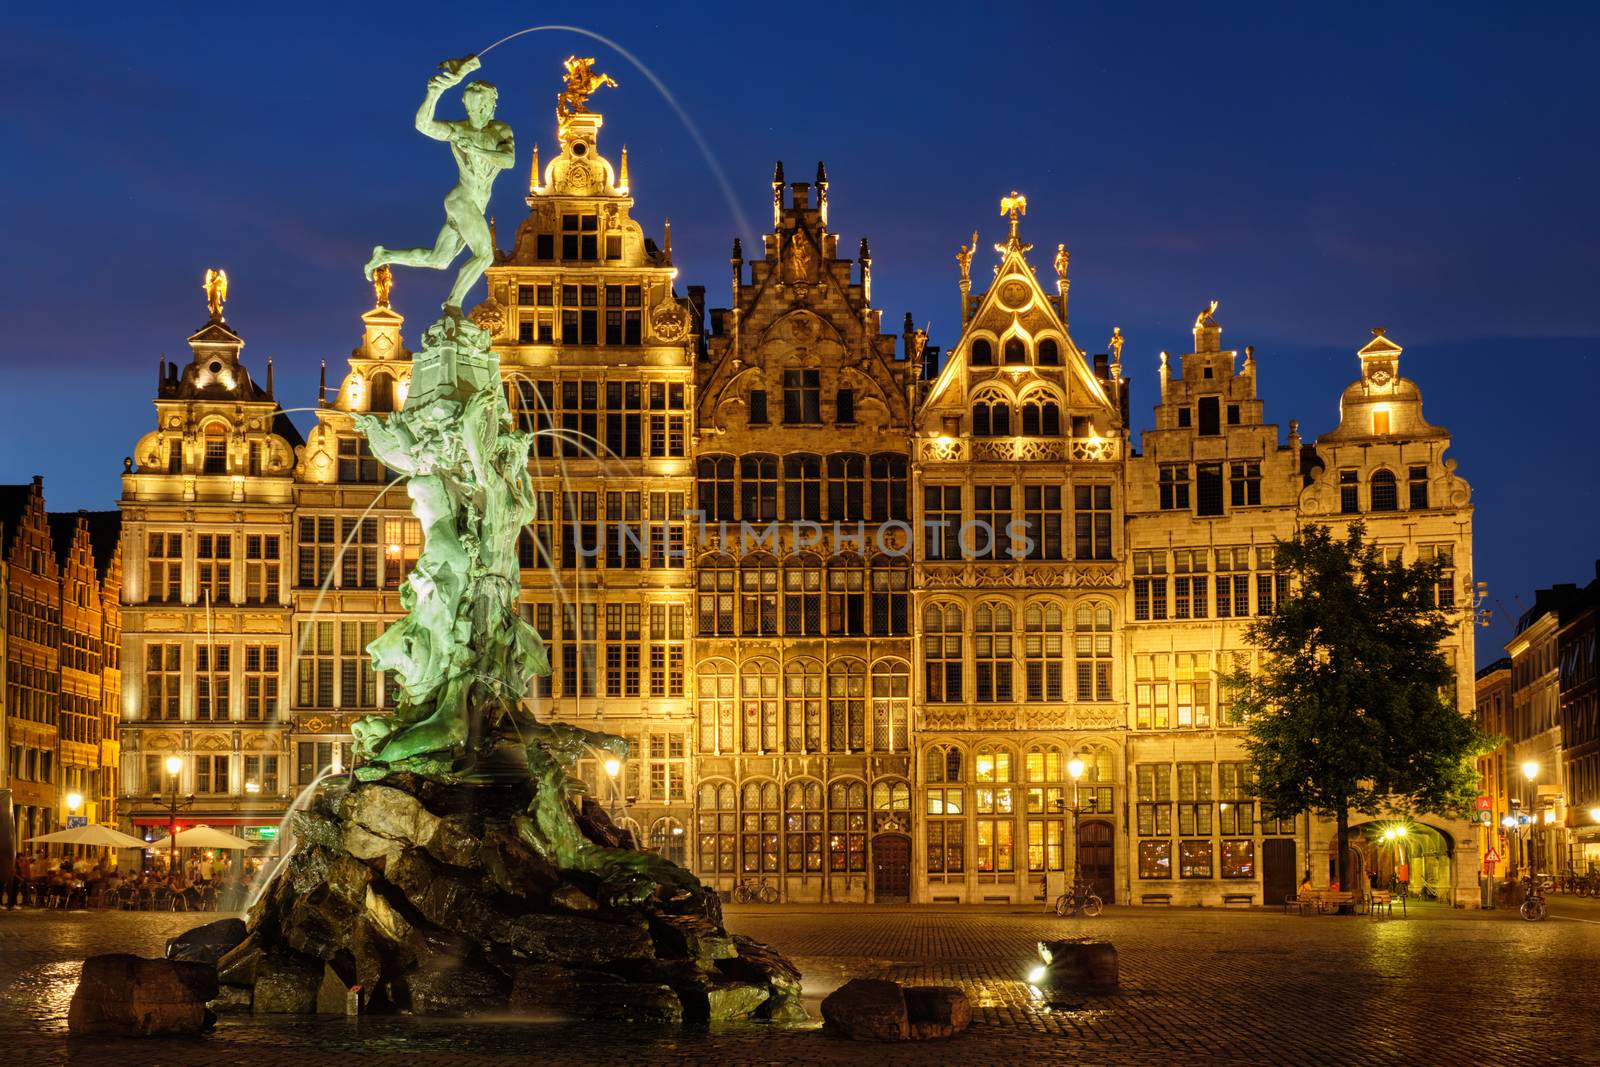 Antwerp Grote Markt with famous Brabo statue and fountain at night, Belgium by dimol